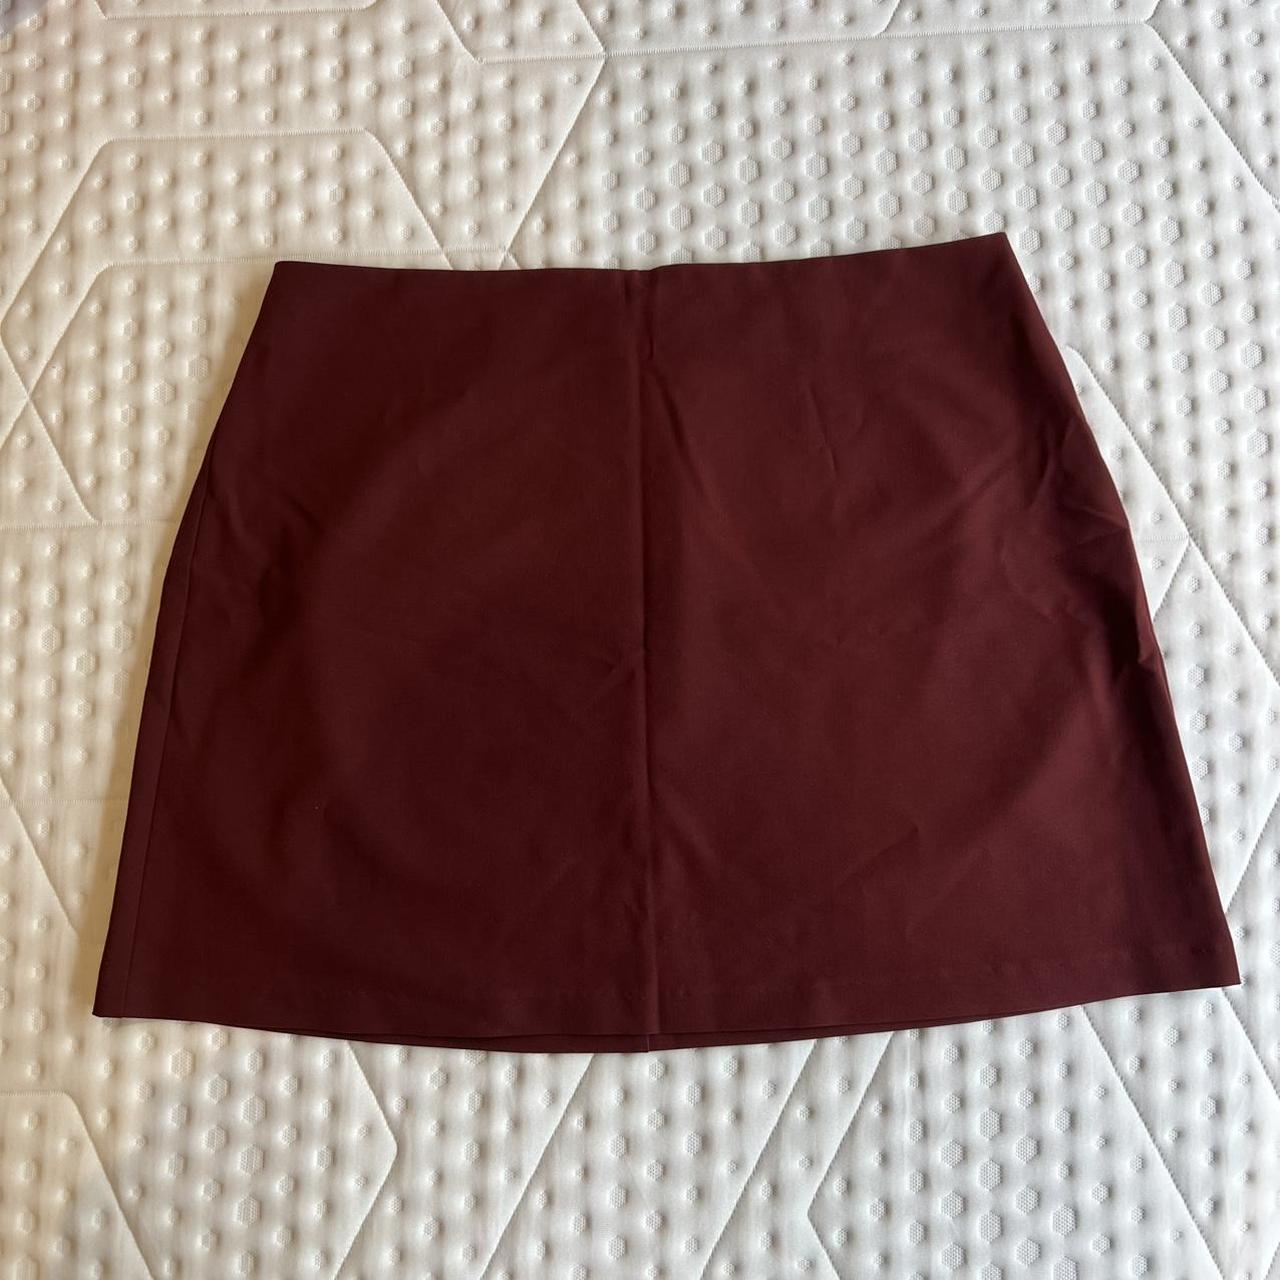 Asos mini skirt Never worn New without tags Size... - Depop